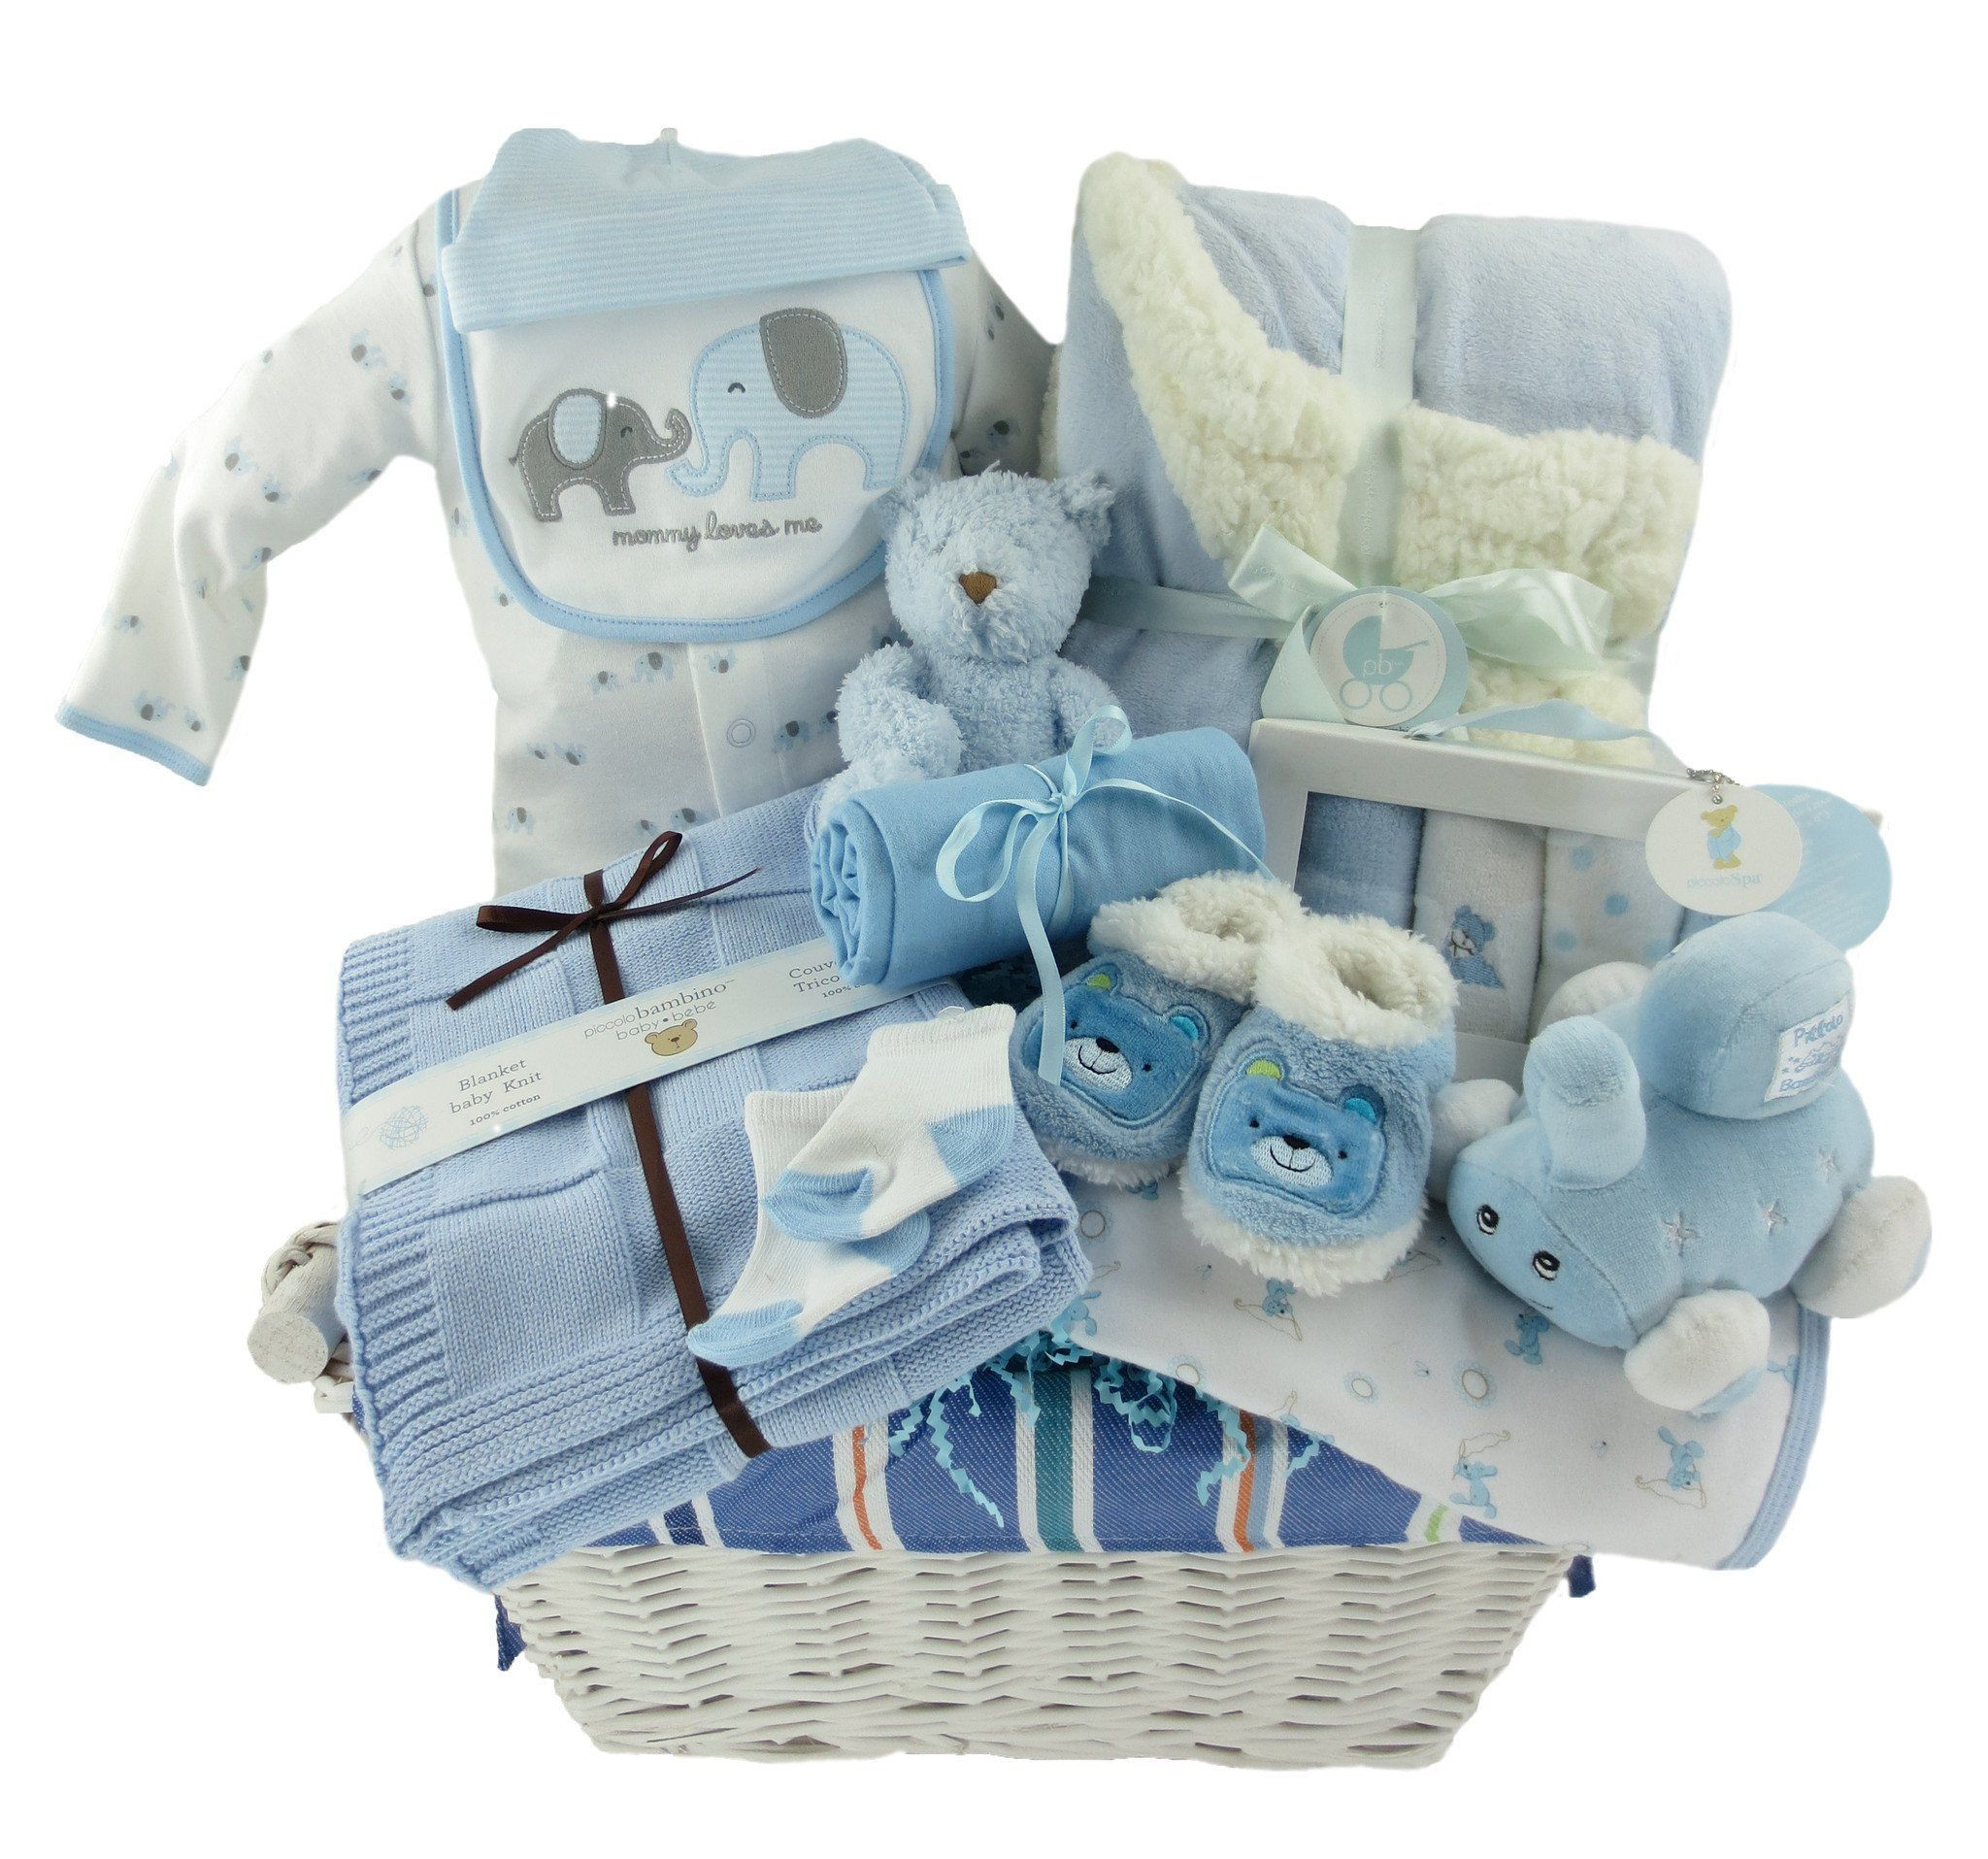 Baby Clothes Gift Basket
 Luxurious Baby Boy Gift Basket